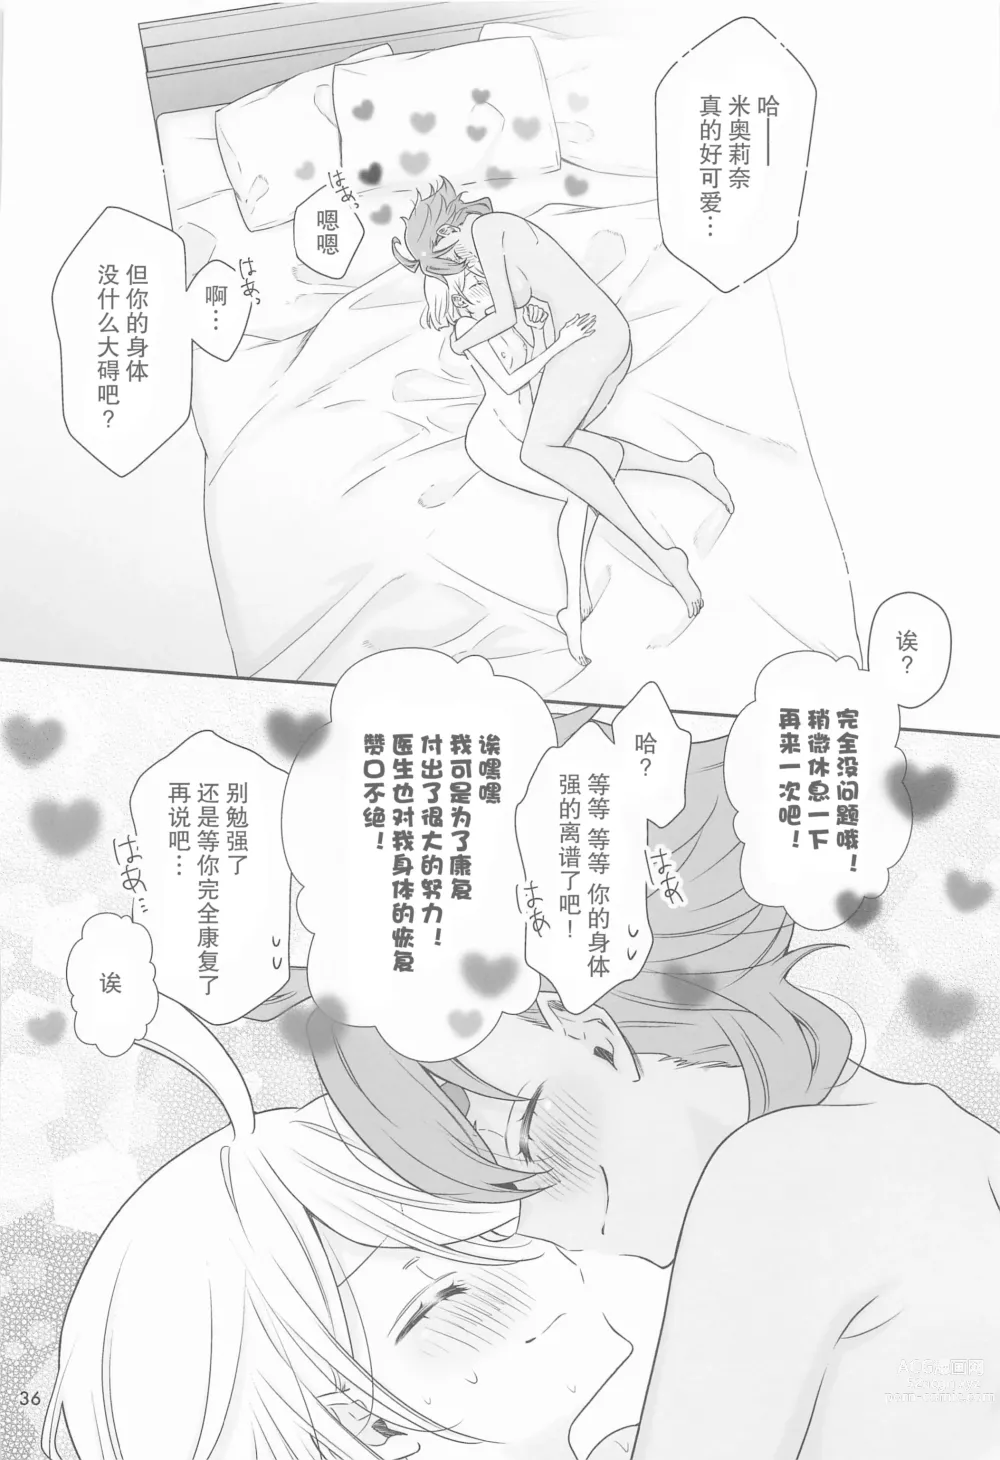 Page 35 of doujinshi 祝福之日